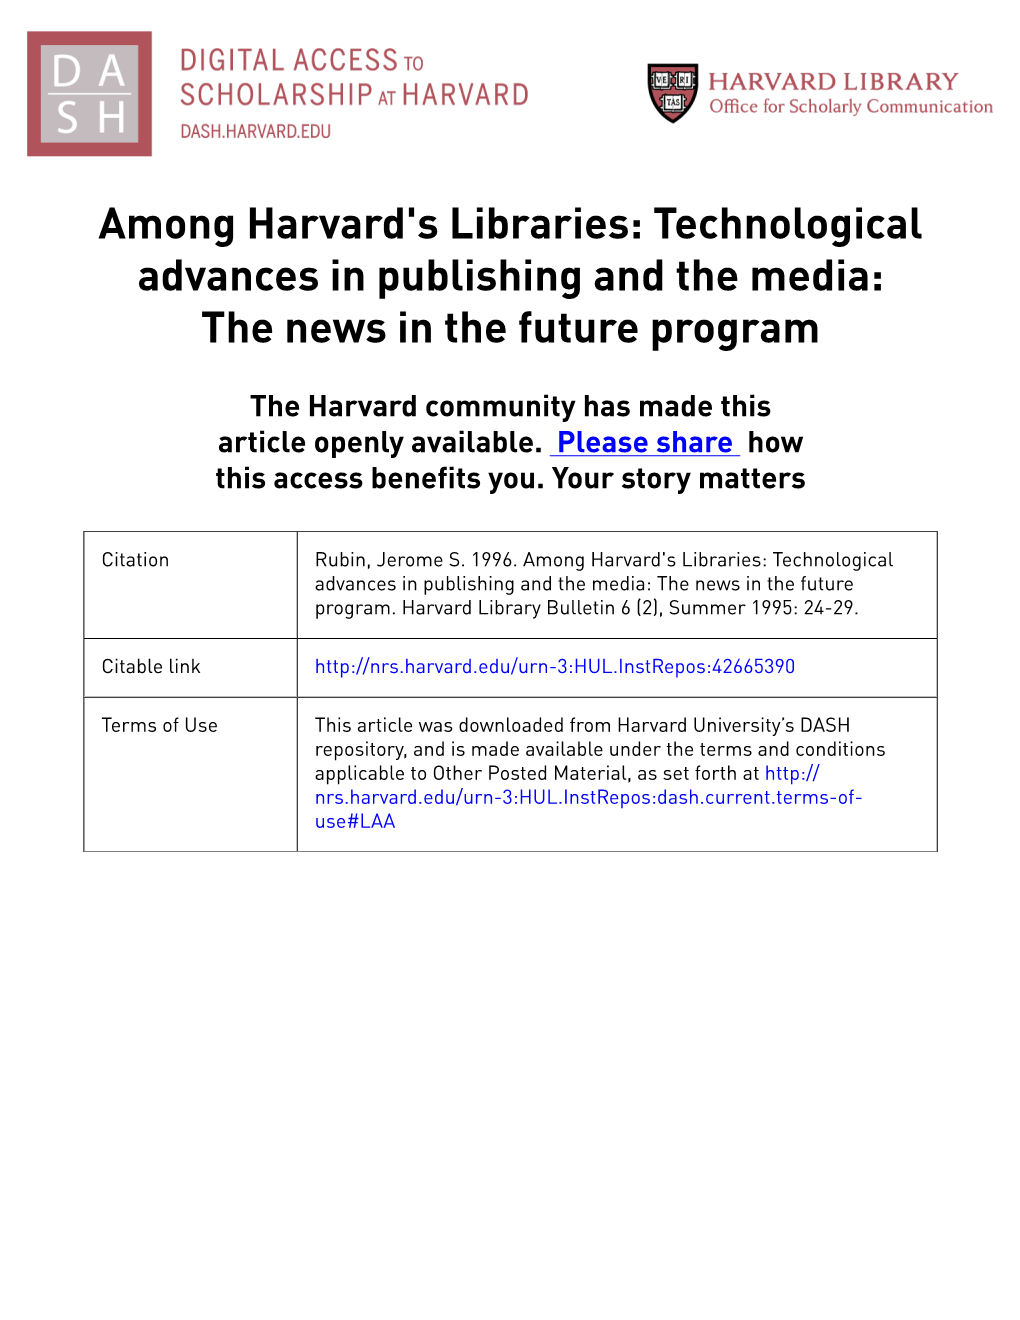 Among Harvard's Libraries: Technological Advances in Publishing and the Media: the News in the Future Program